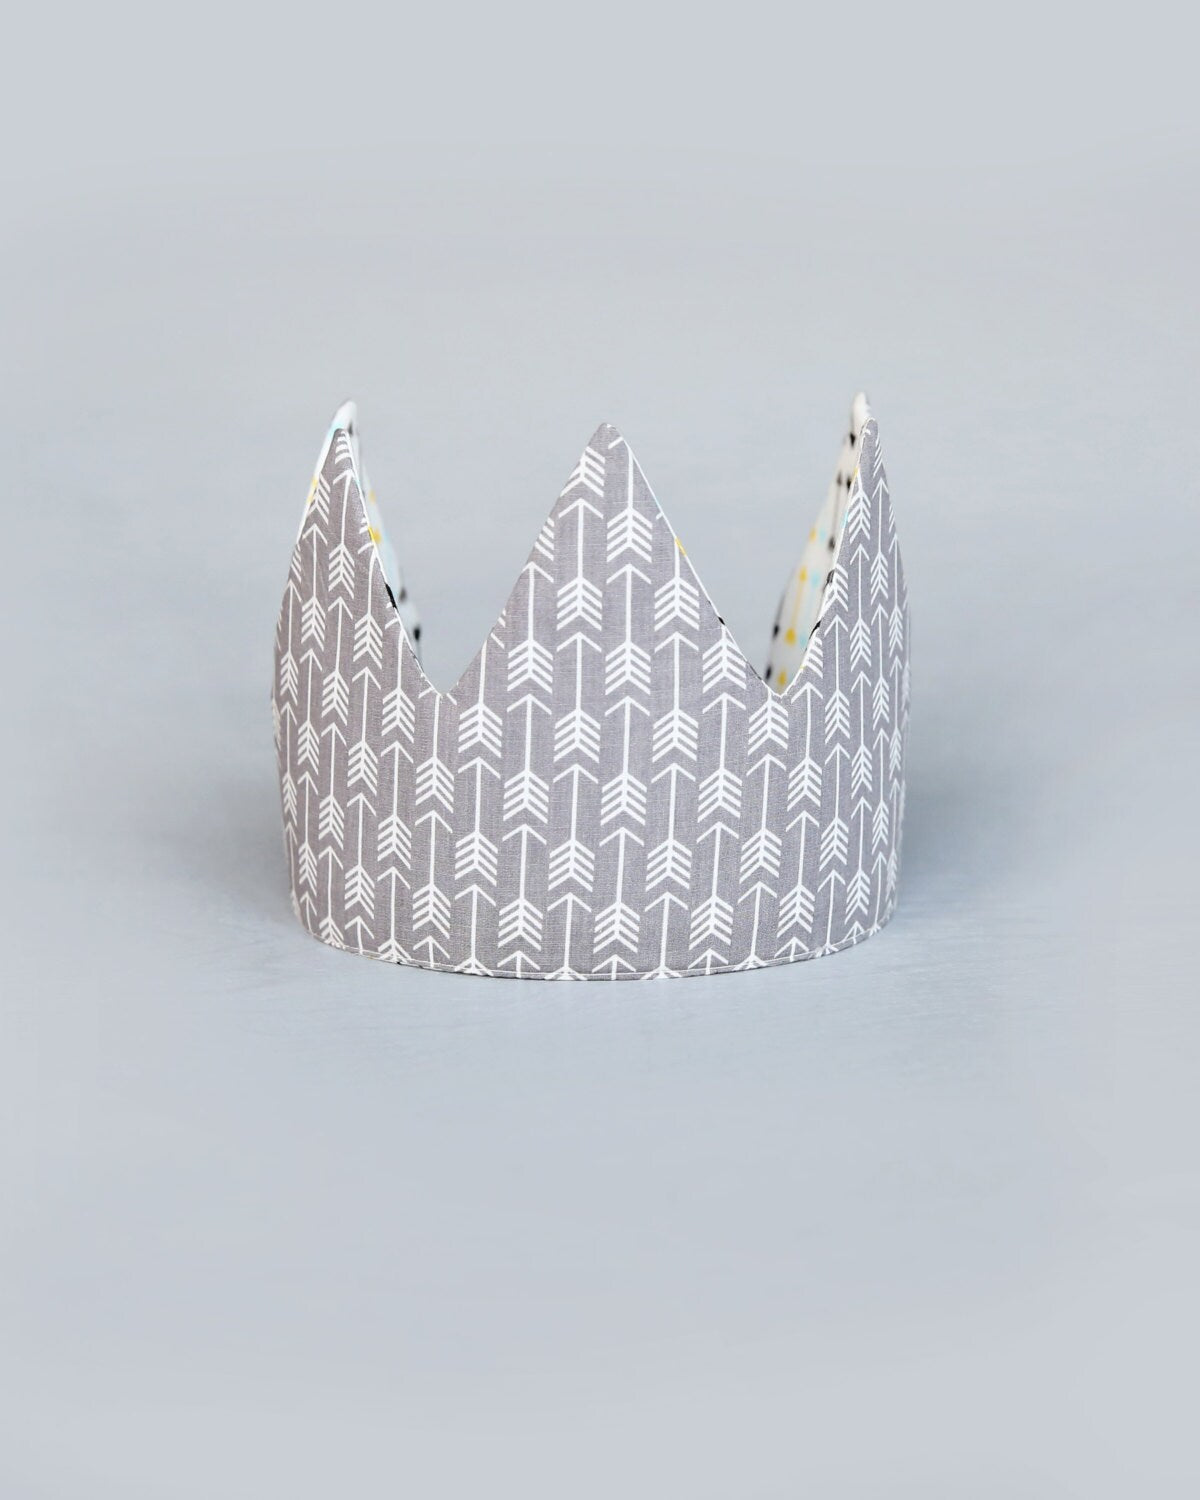 Dress Up Crown - Sequin Crown - Birthday Crown - Gray Arrow Crown Reverse Yellow, Aqua and Gray Arrows - Fits all